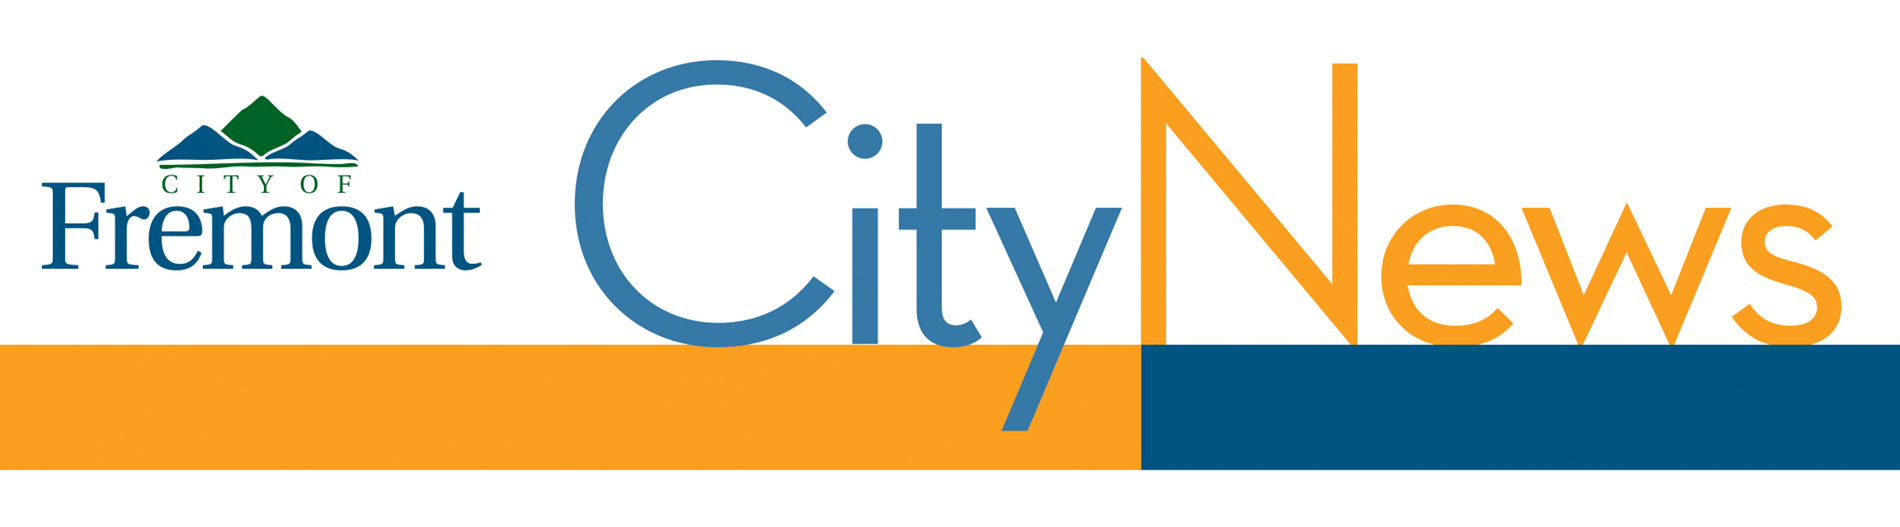 city news masthead with Spring 2022, Issue 87 in text